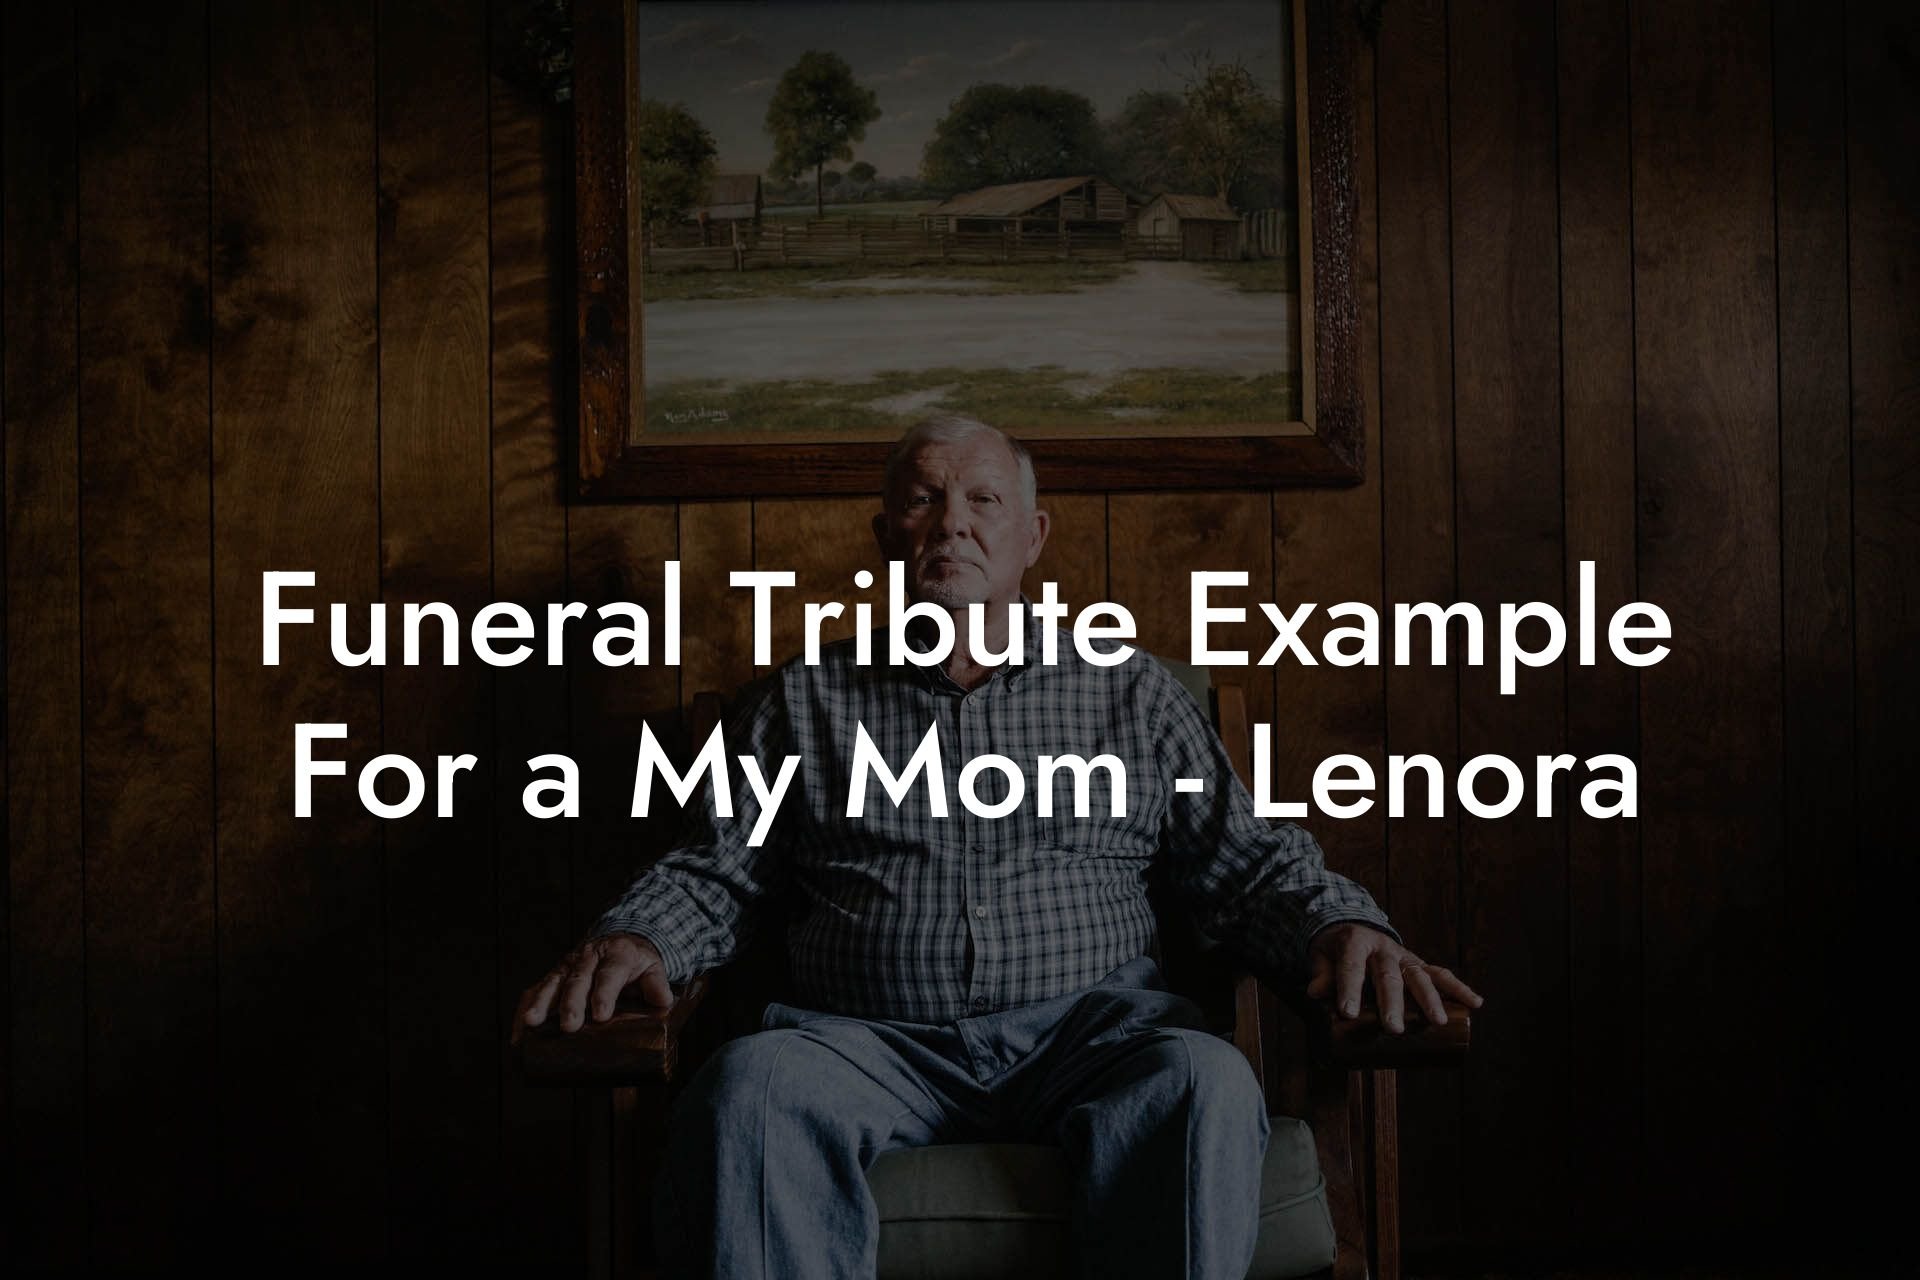 Funeral Tribute Example For a My Mom   Lenora